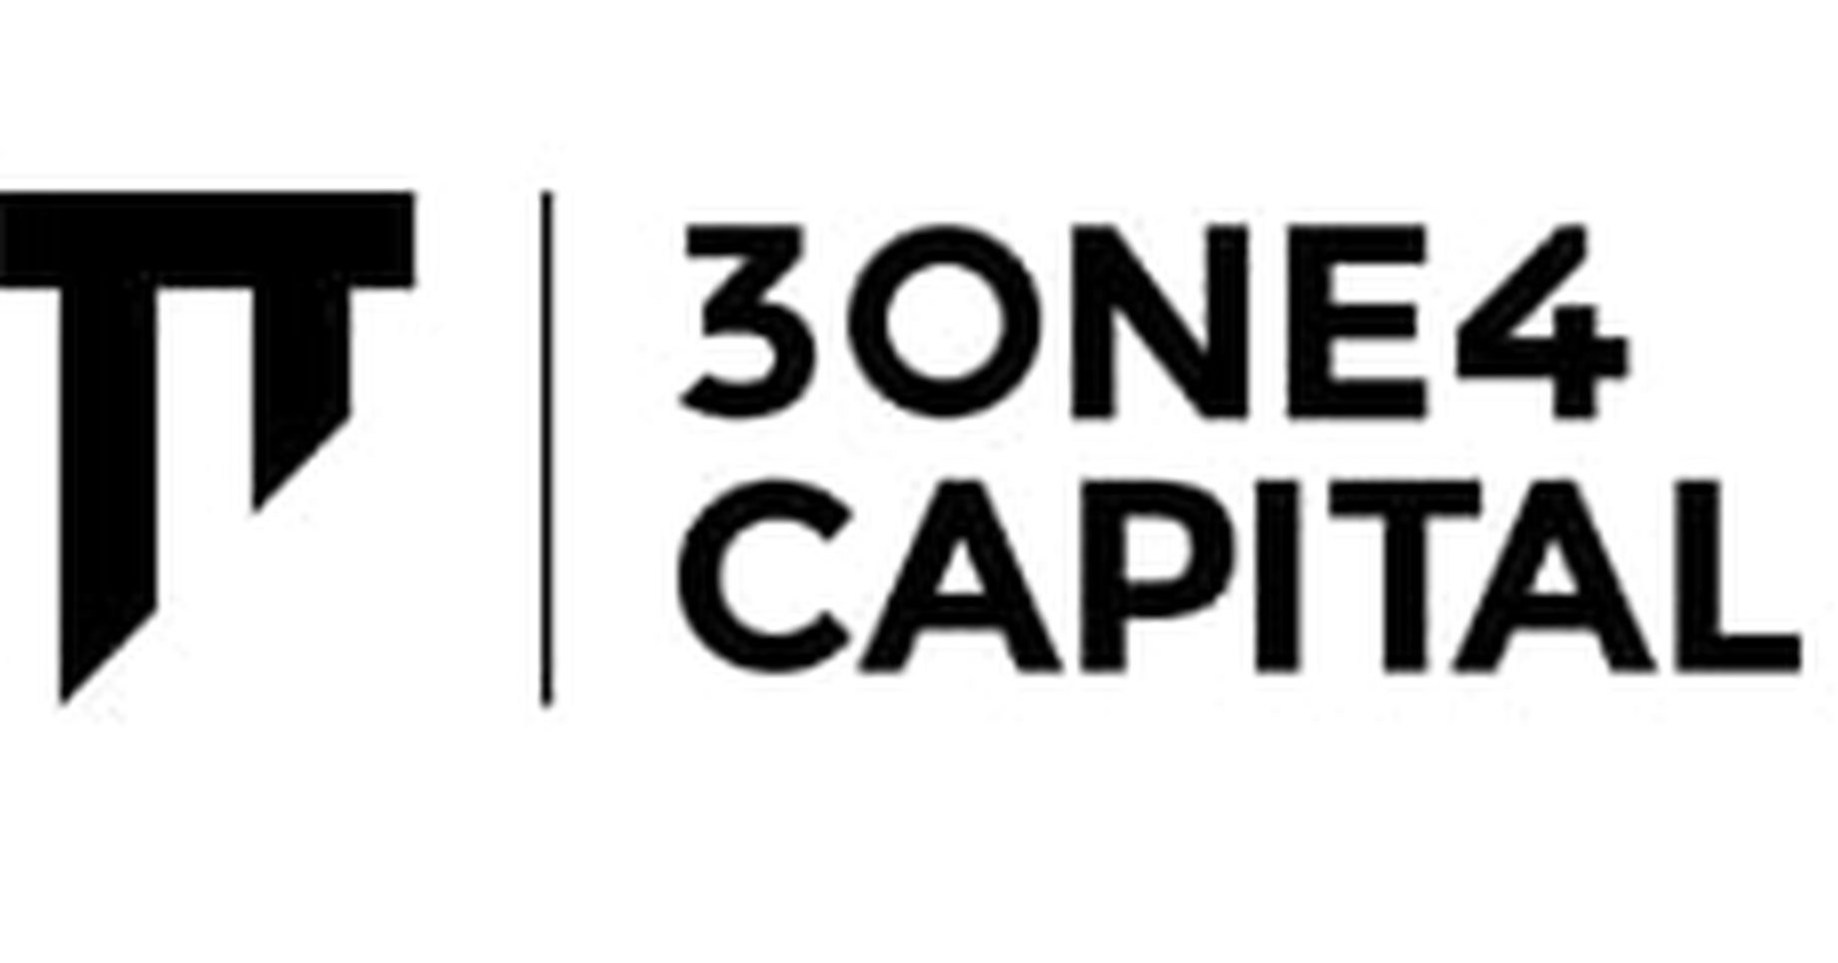 3one4 capital funds ranked among india's top performing vc funds